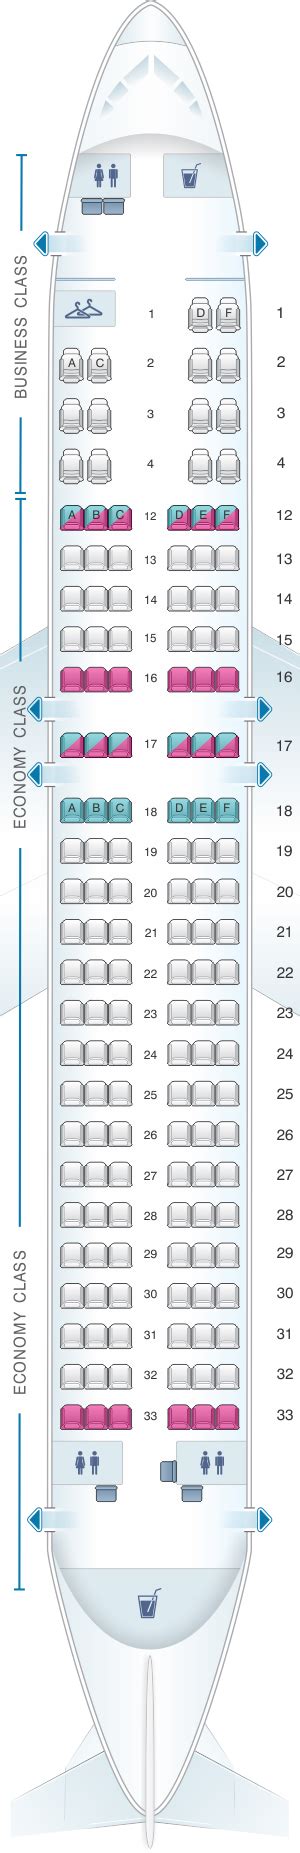 Seat Map Airbus A321 200 Air Canada Best Seats In Plane Images And